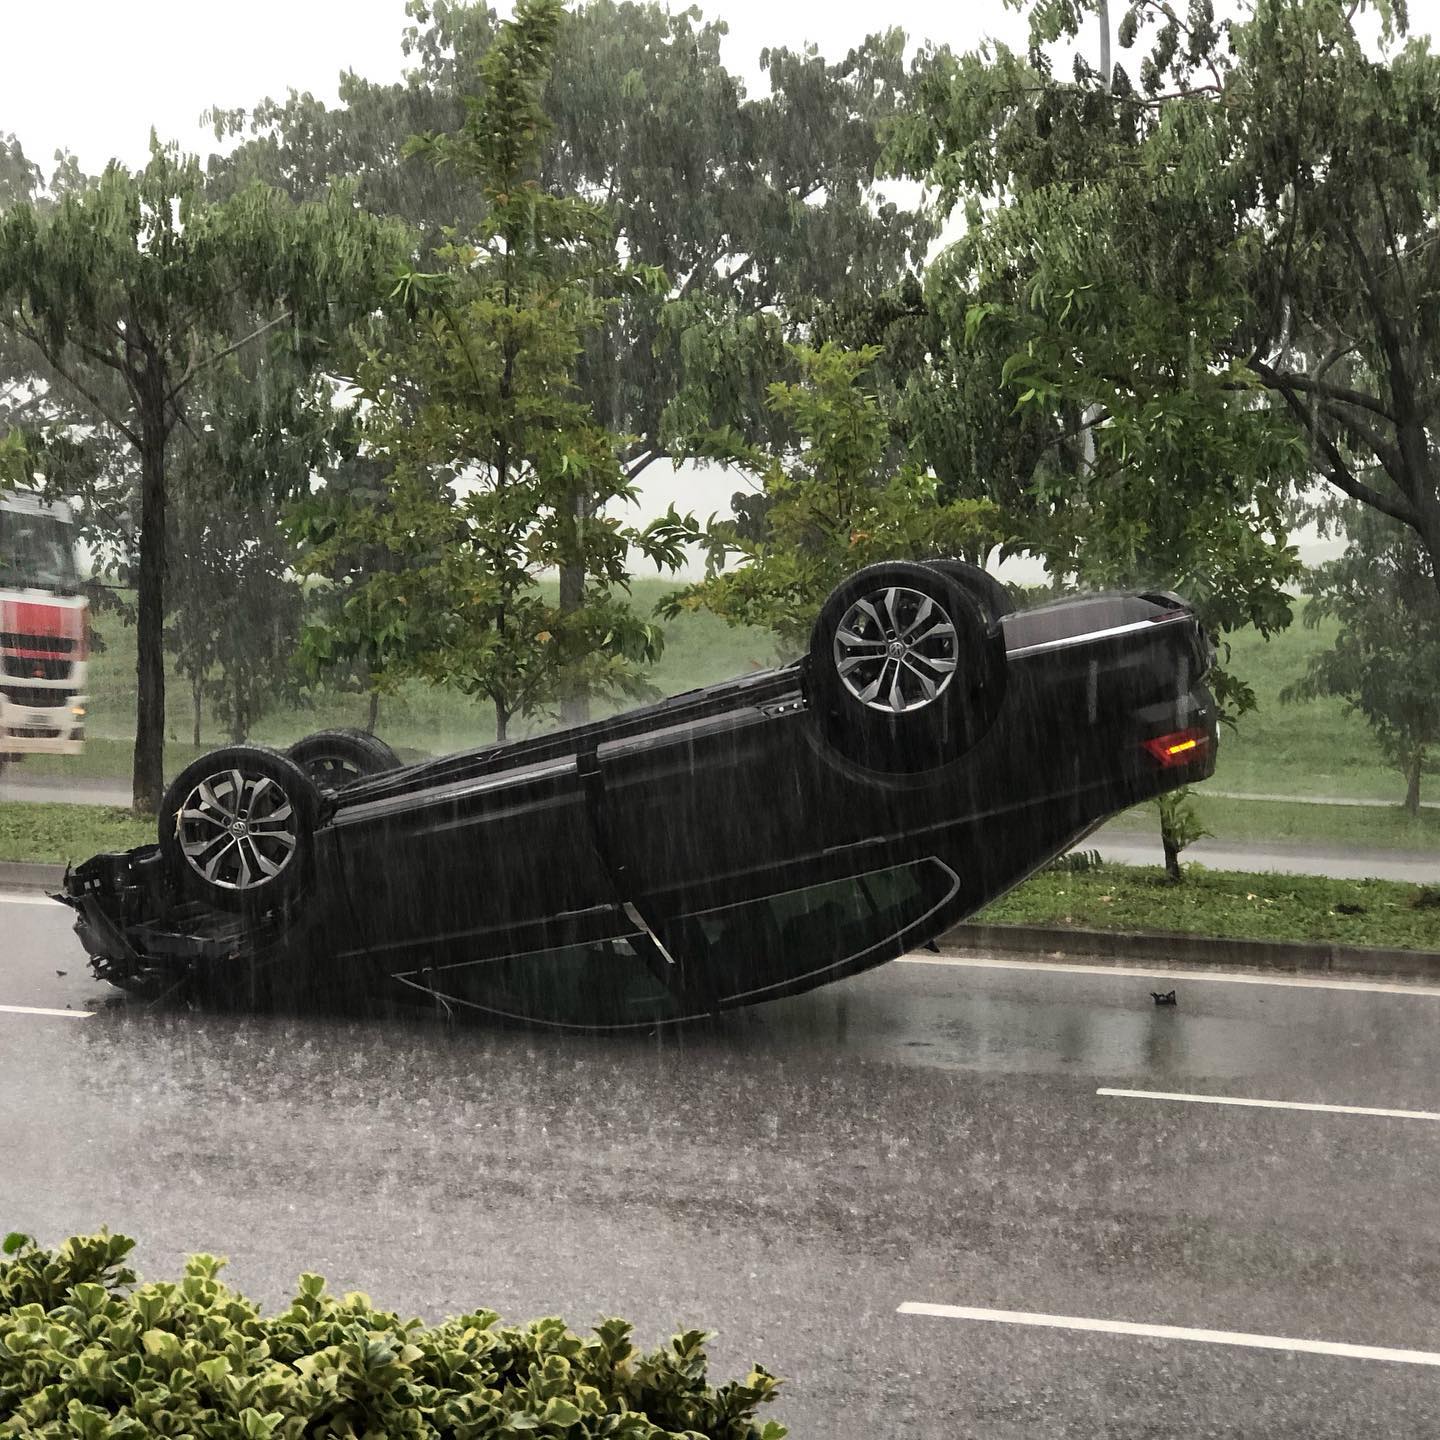 Car lipped over on a rainy day